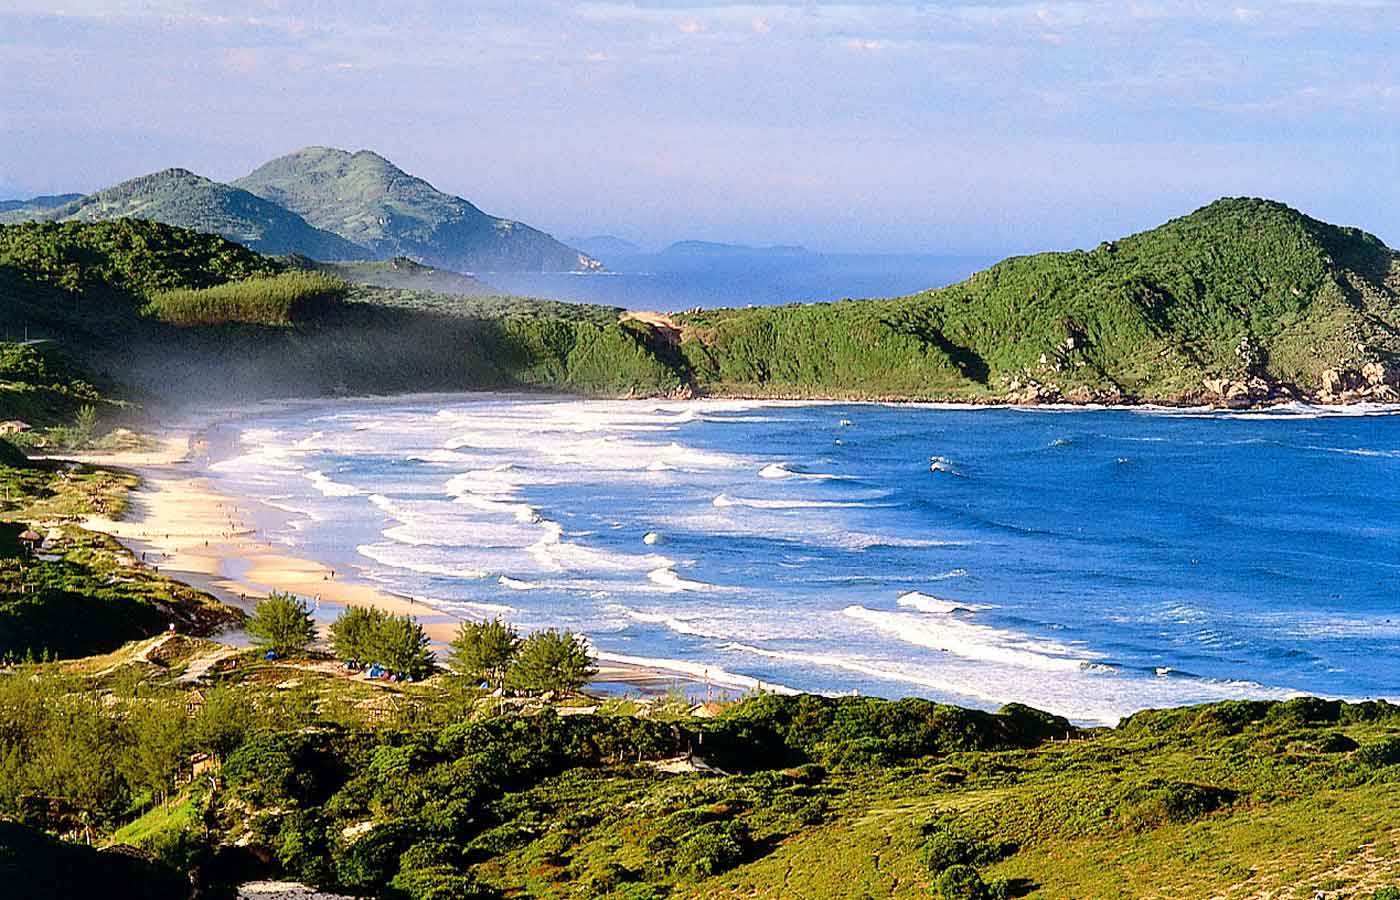 Santa Catarina has one of the most striking coastlines in South America. (Photo Internet reproduction)